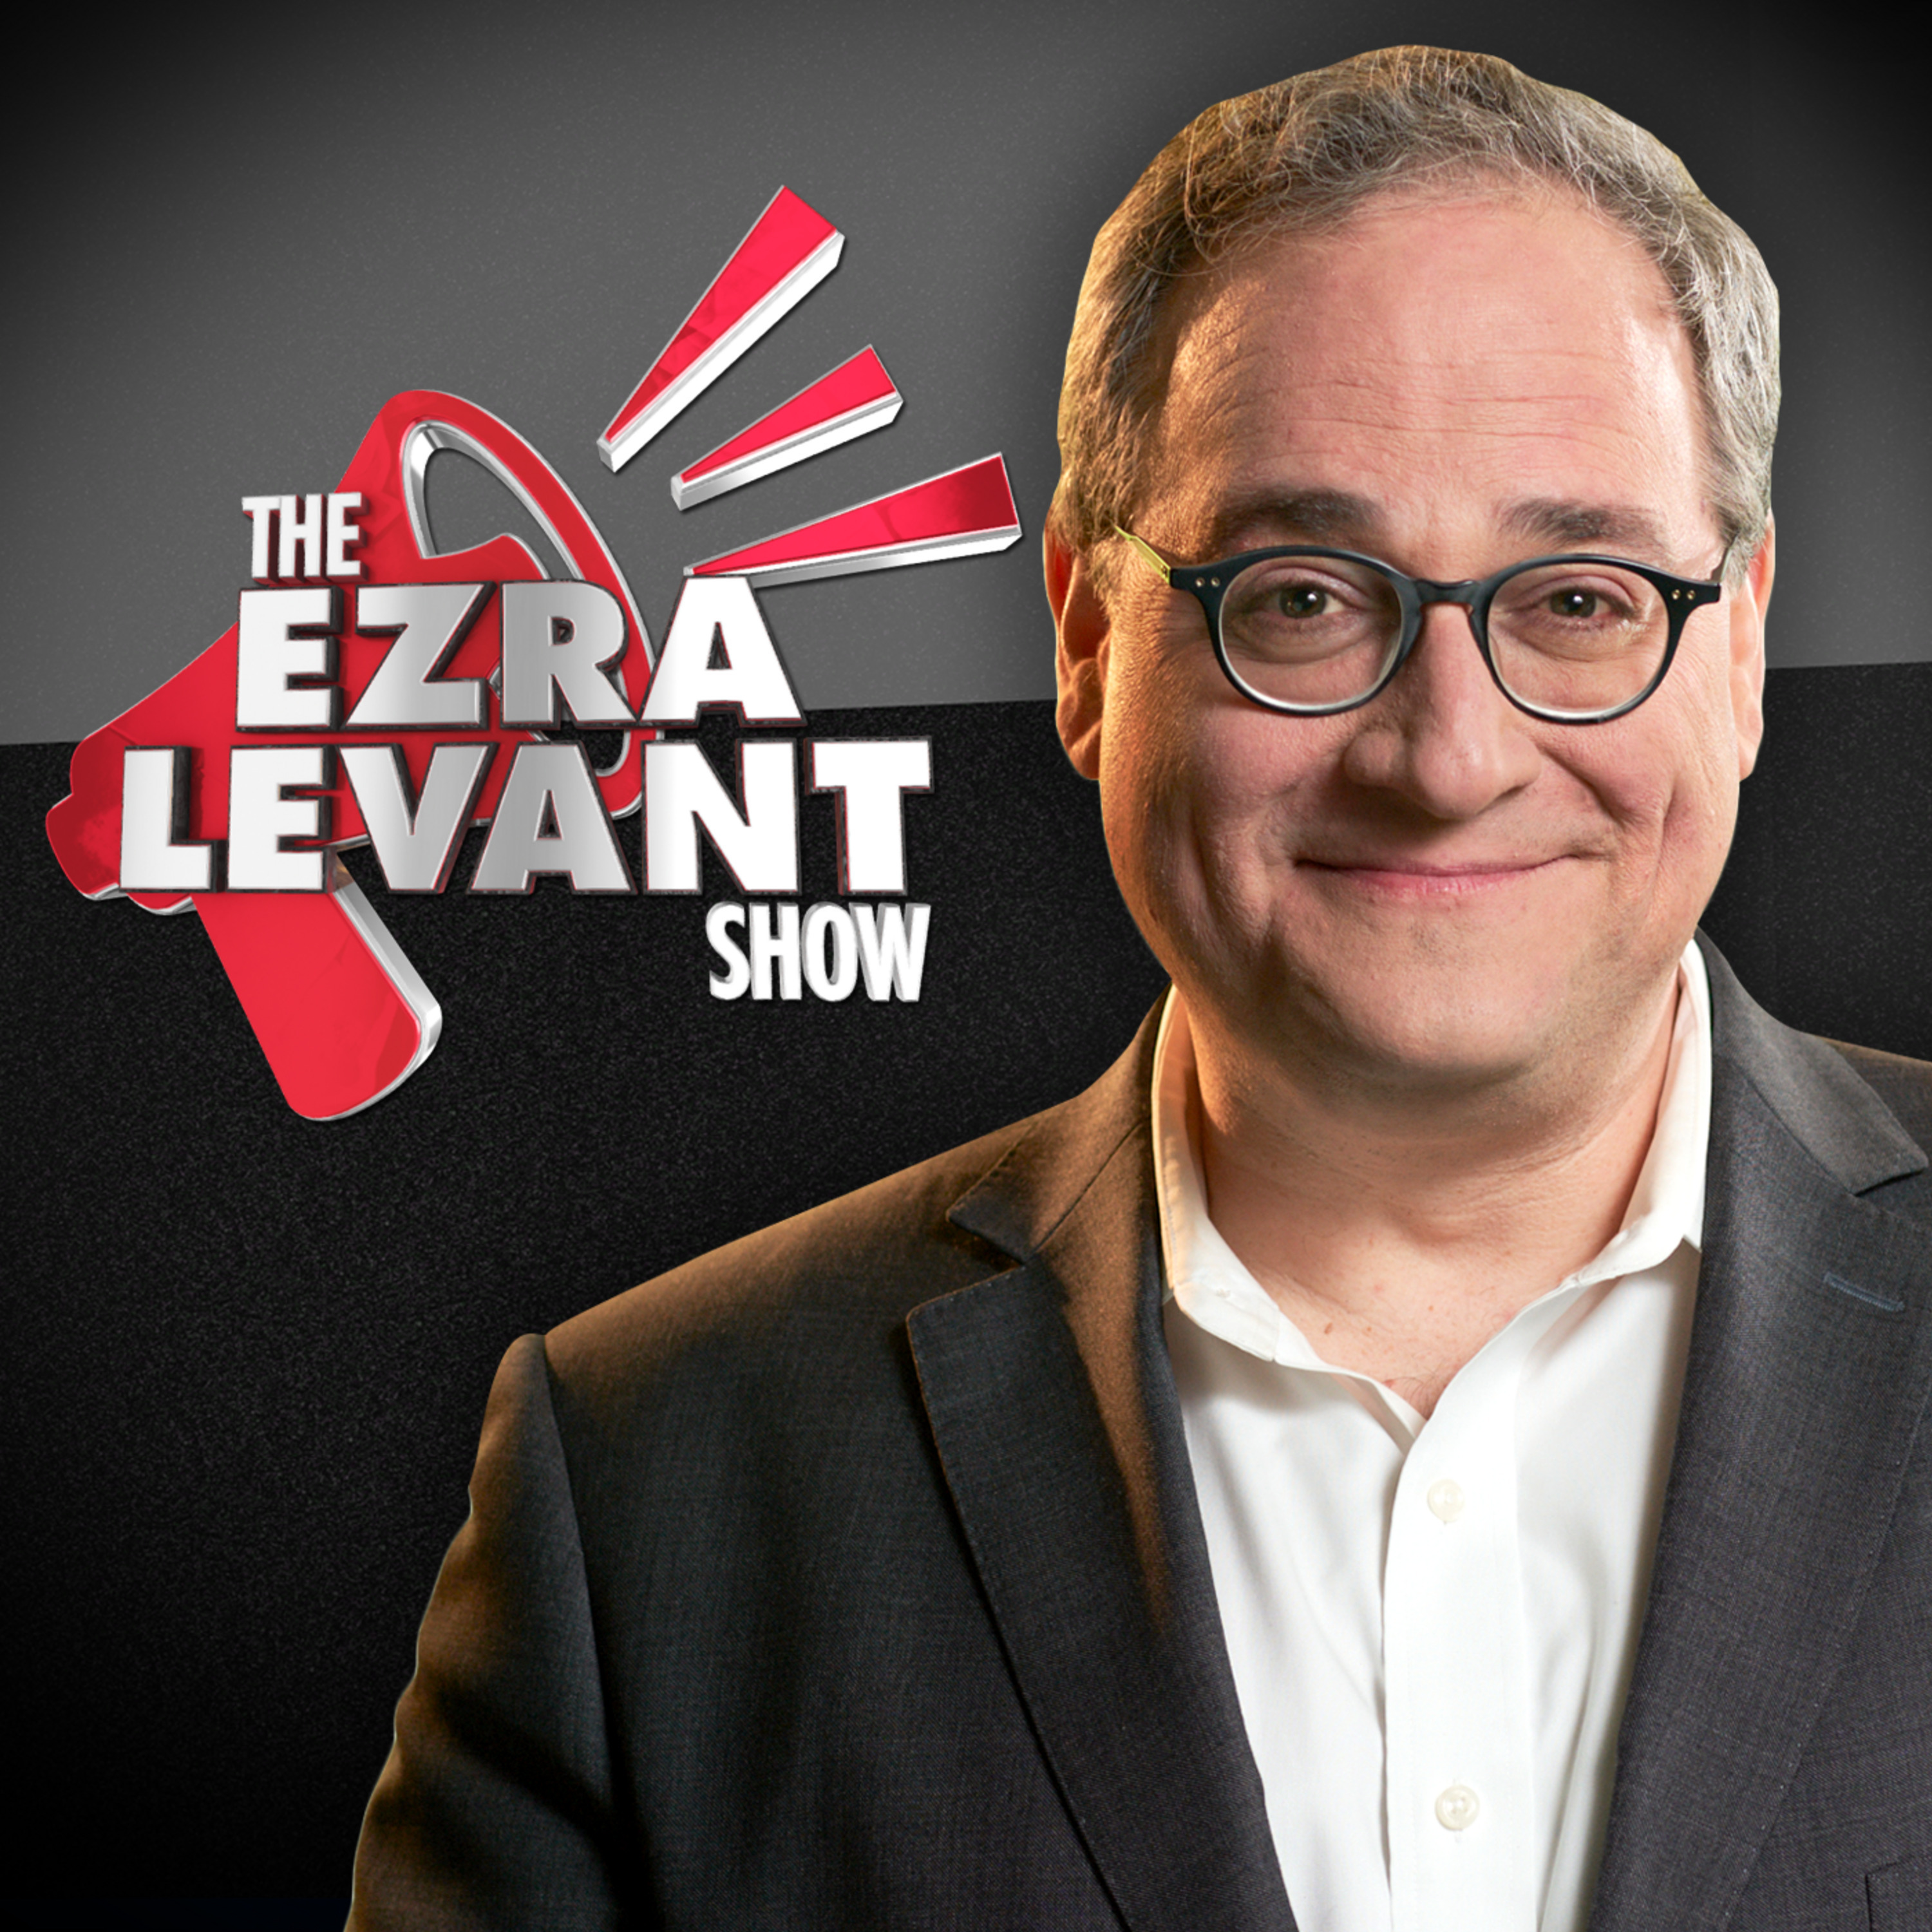 EZRA LEVANT | For Danielle Smith to succeed, she has to stand in her truth